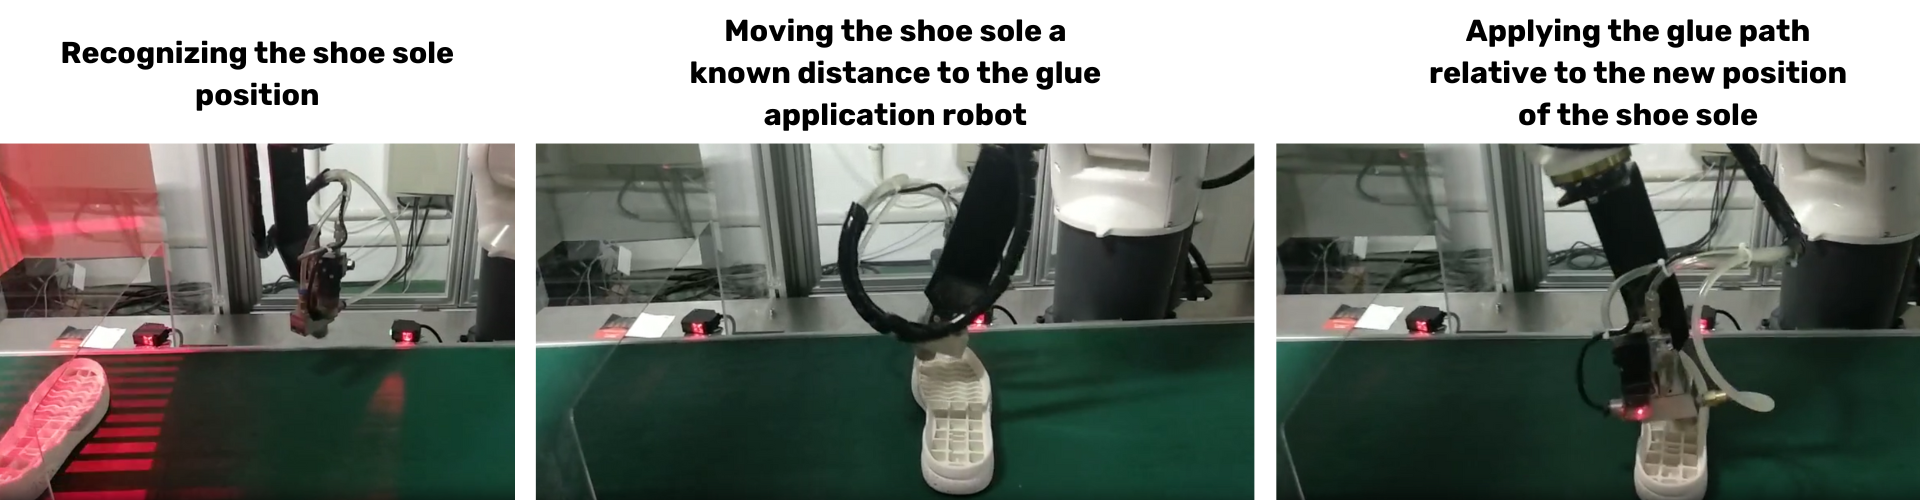 SCAPE 3D Object Recognition identifying shoe soles shapes in order to enable a robot to spray glue on it